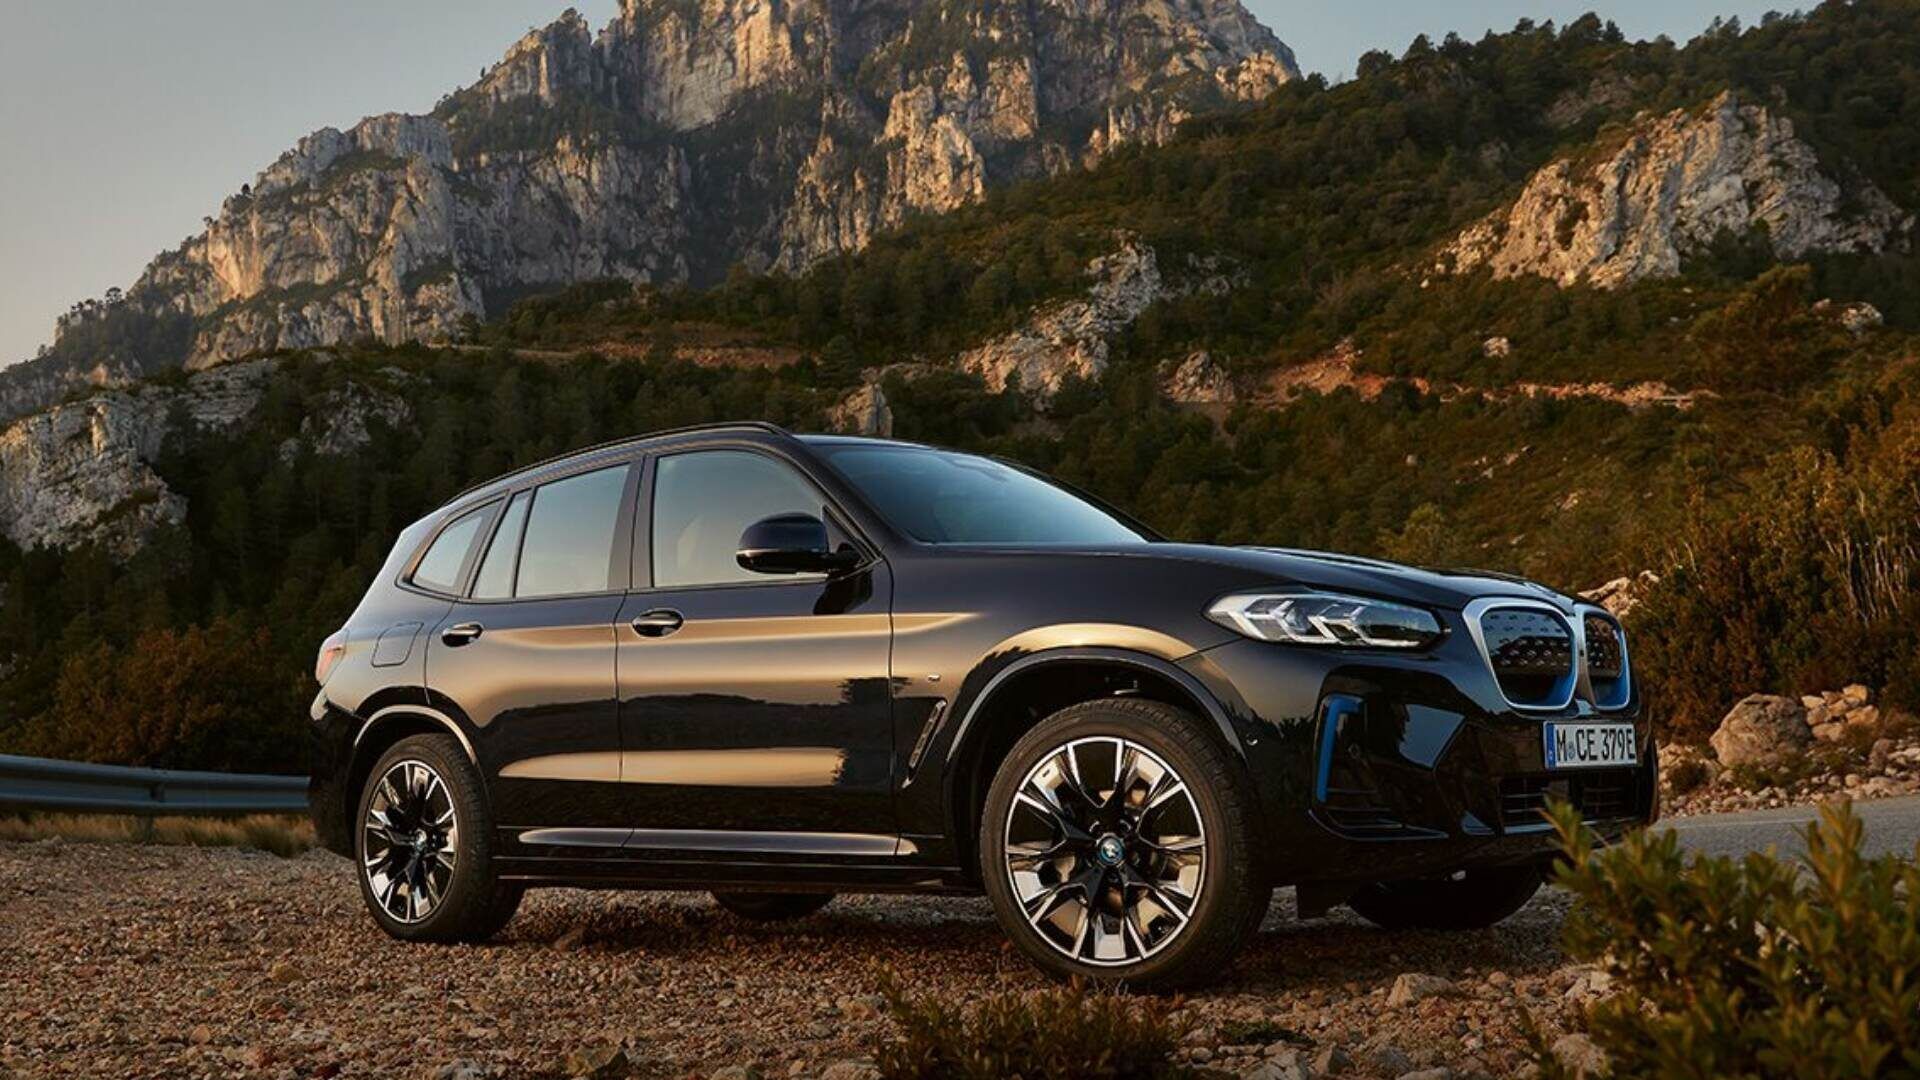 BMW iX3 driving off road with mountain background